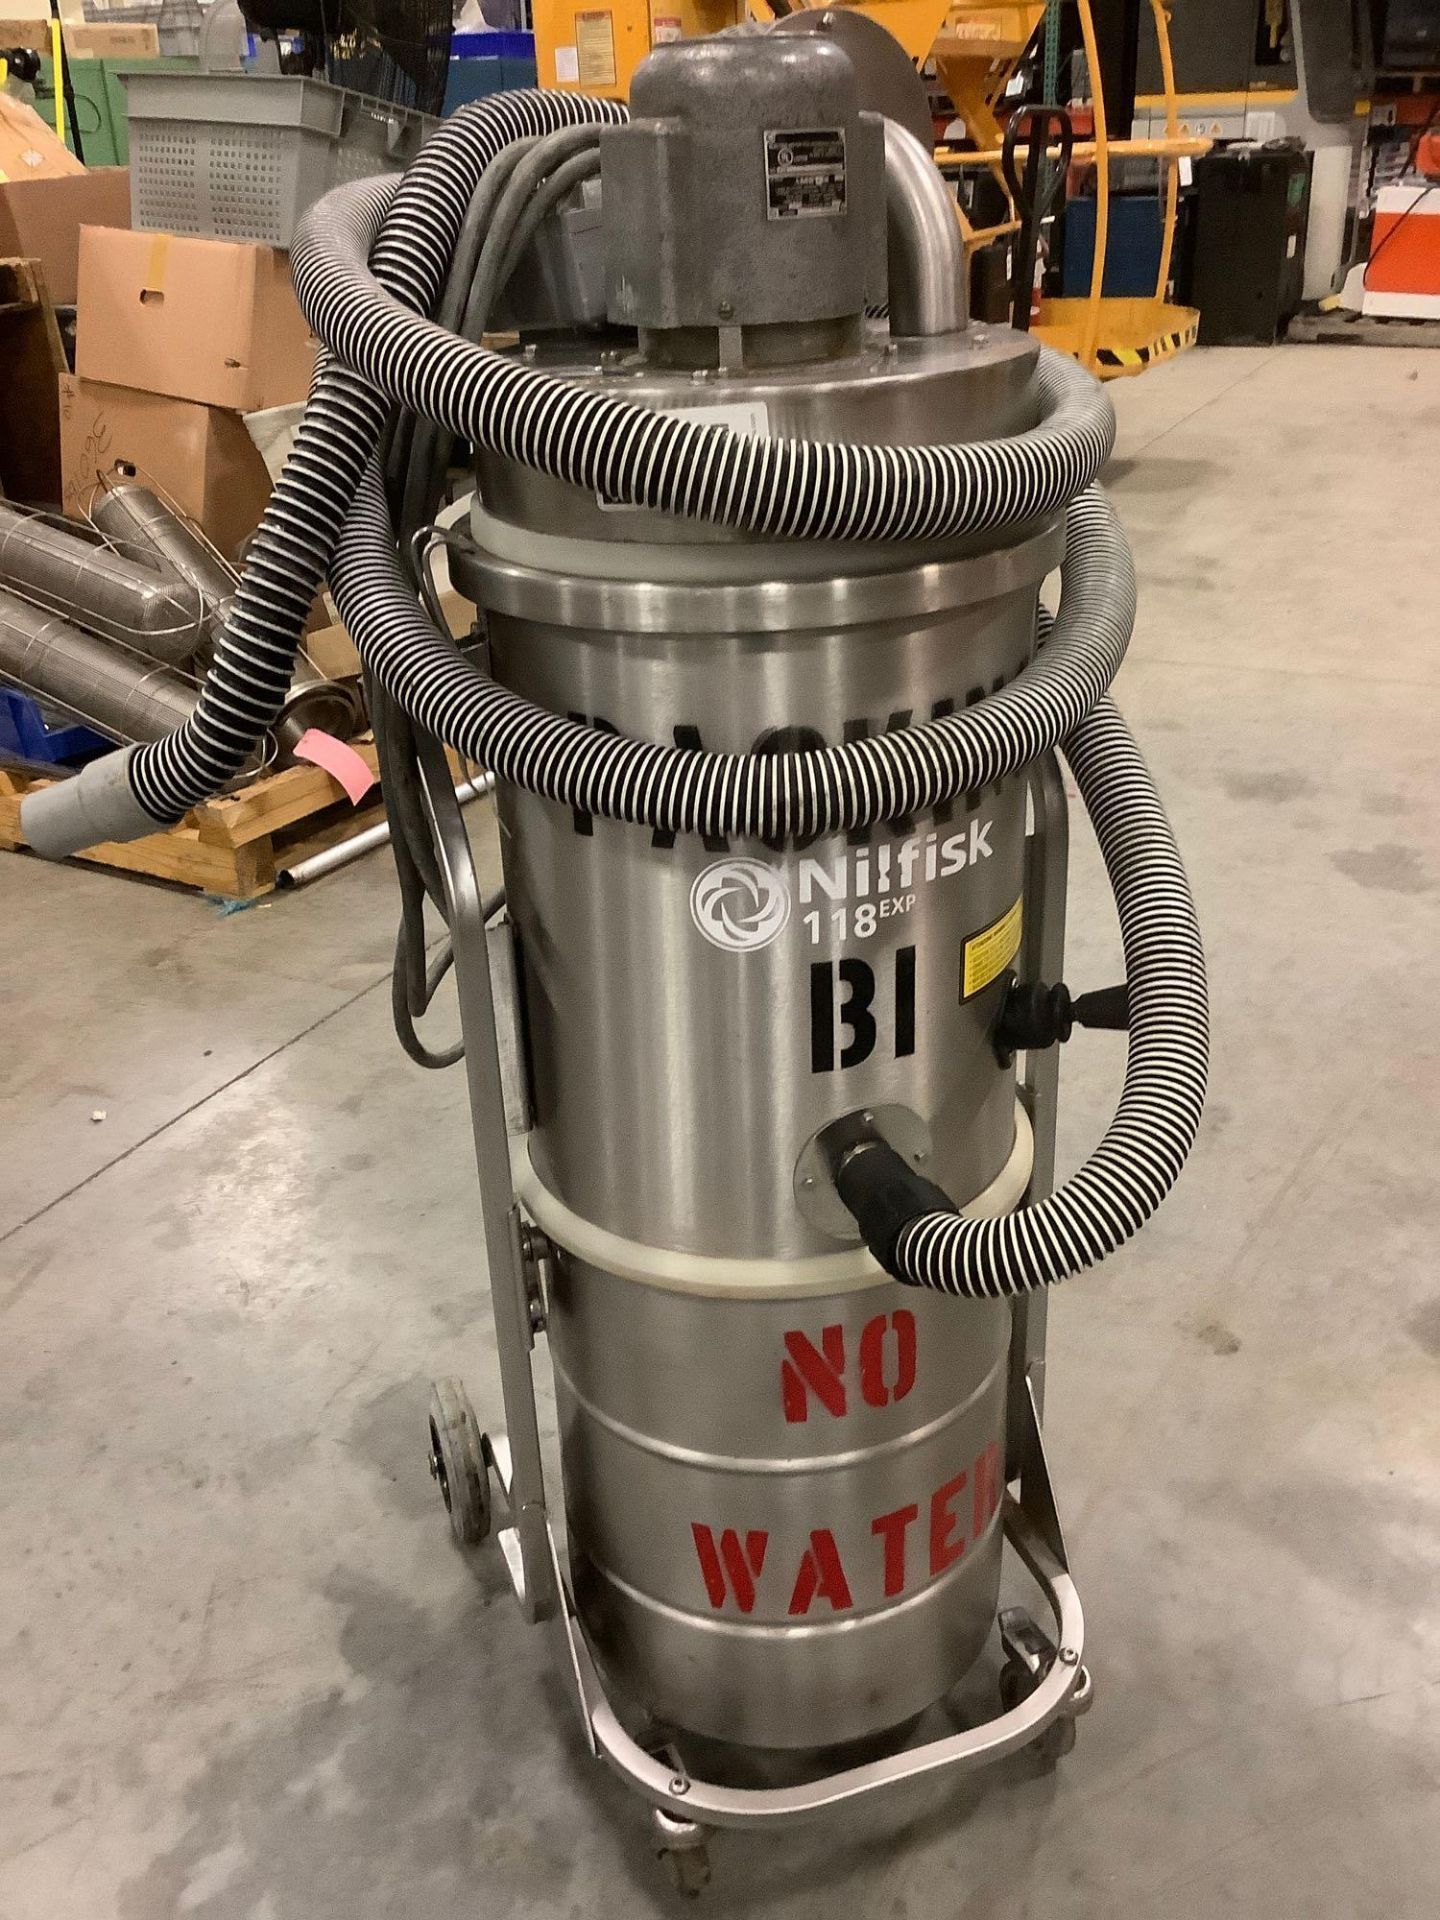 NILFISK CFM INDUSTRIAL VACUUM MODEL 118EXP, APPROX 120 VOLTS, - Image 6 of 8